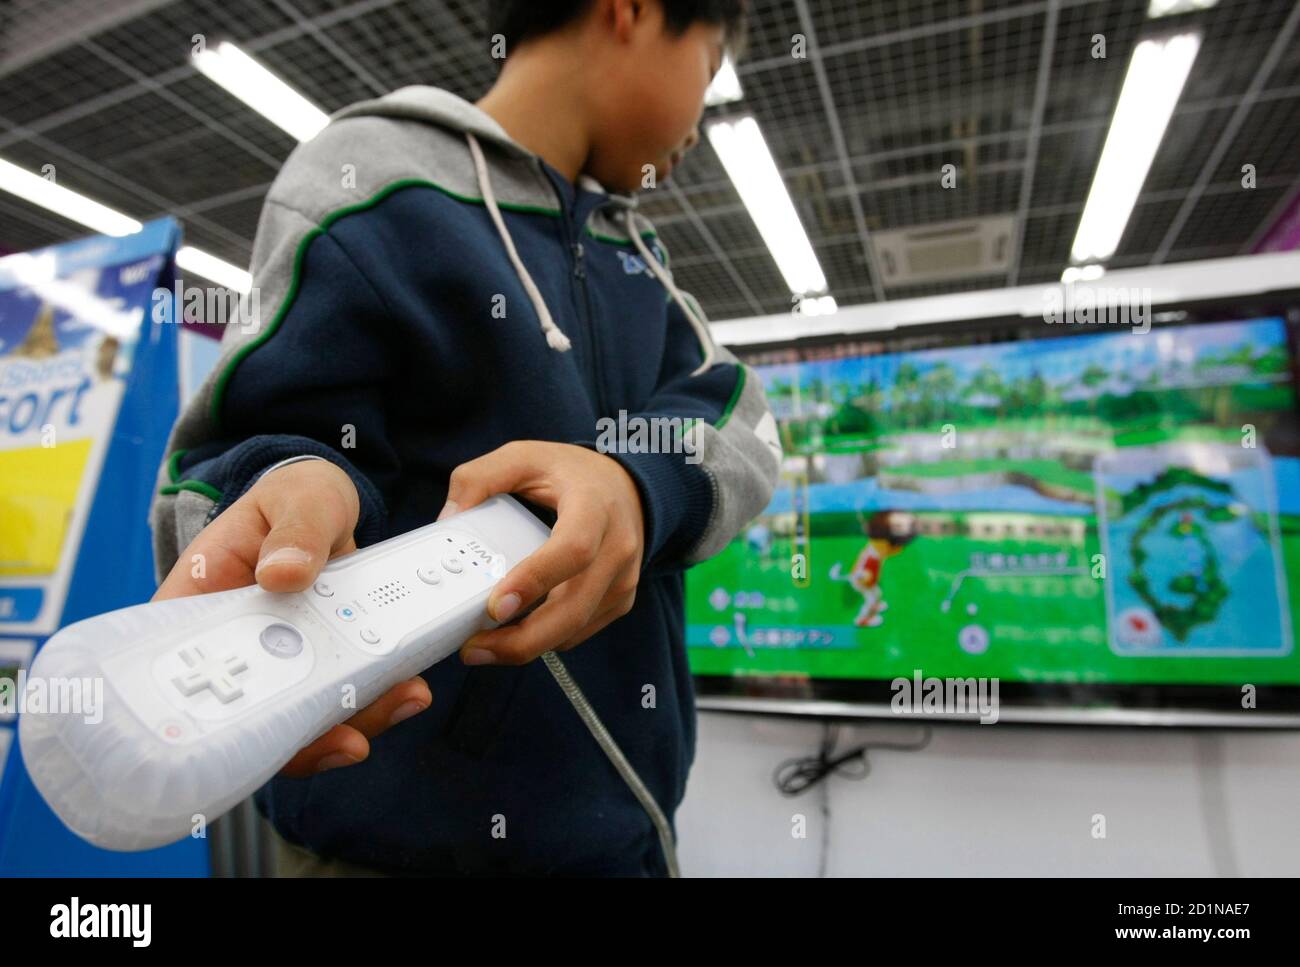 A boy plays Nintendo Co's Wii game console at a Yamada Denki electronics  retail store in Tokyo January 5, 2010. Japan's Nintendo Co Ltd said sales  of its Wii video game console